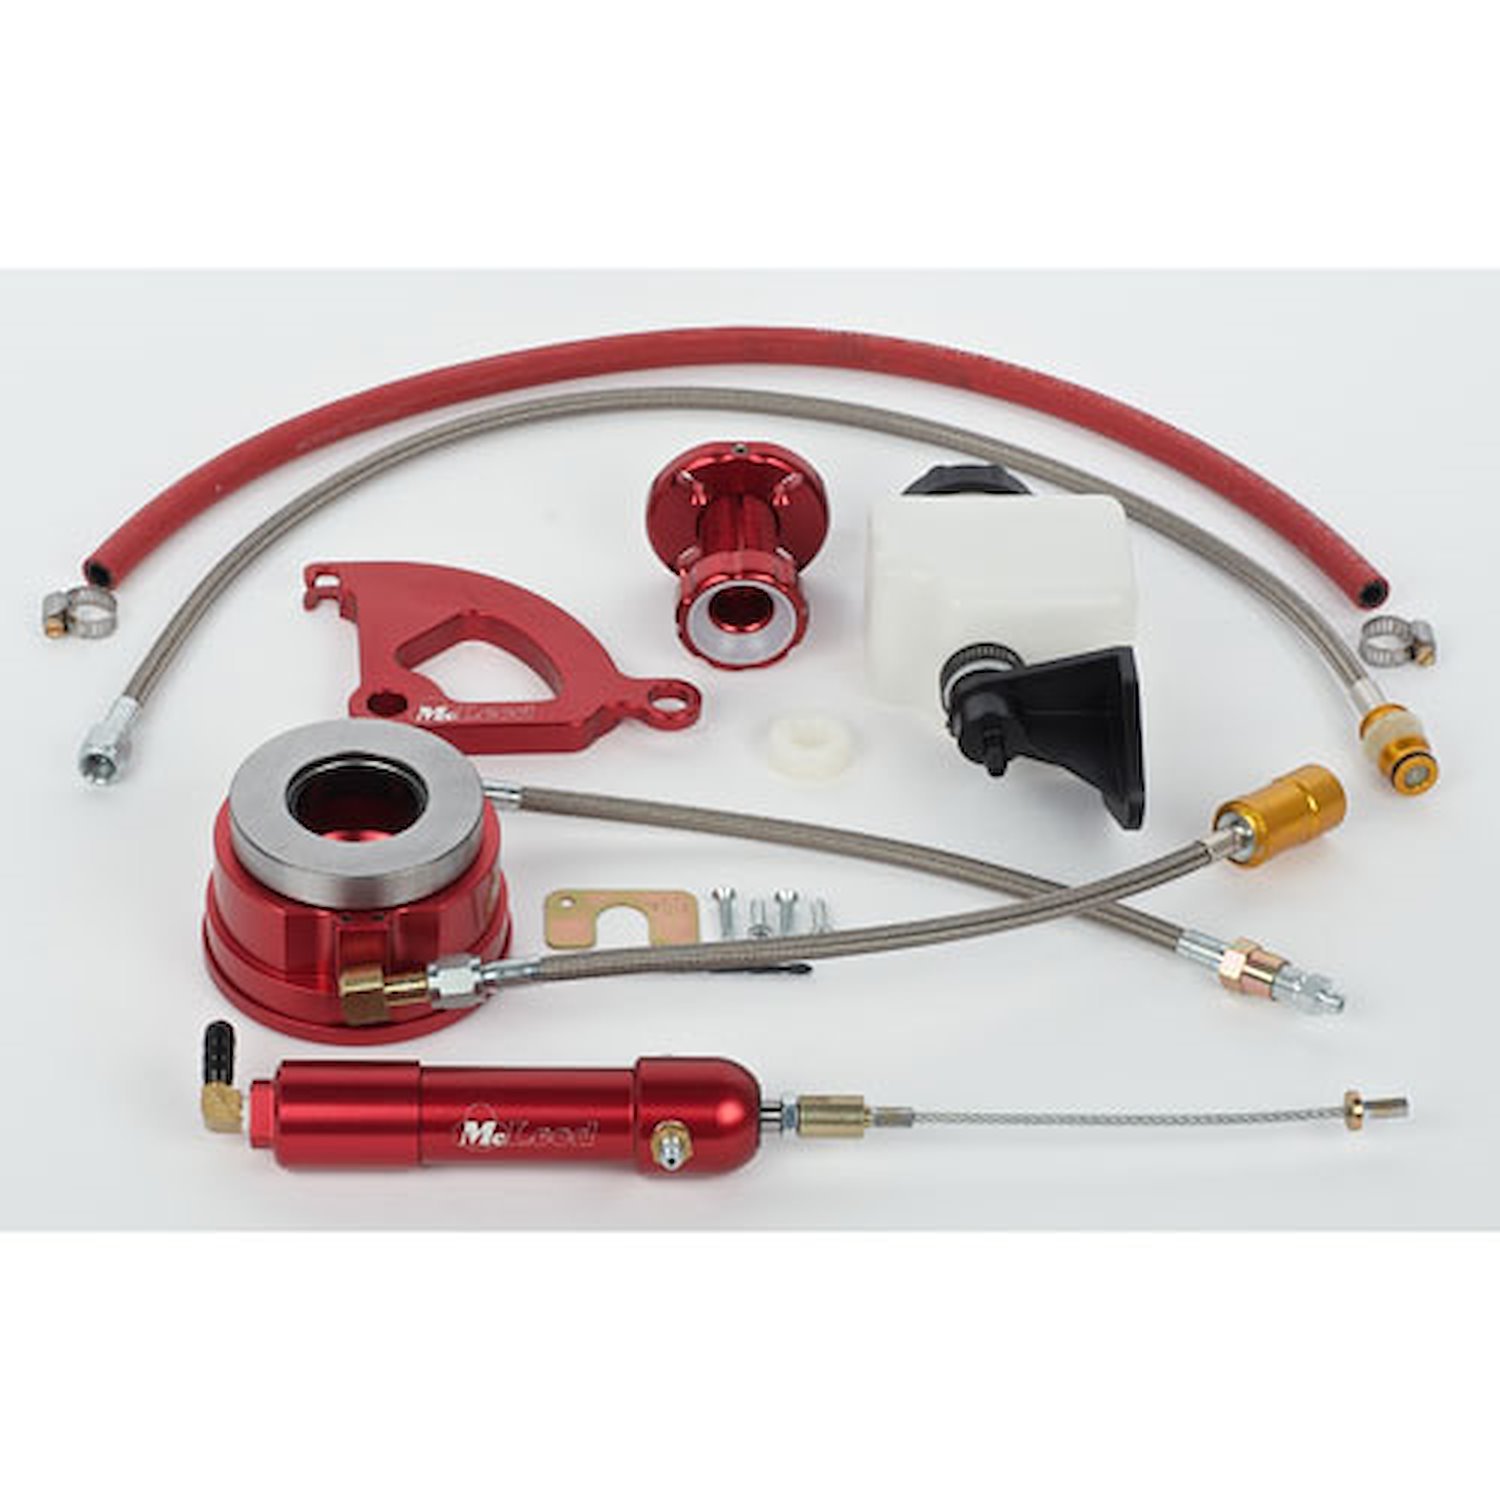 Hydraulic Clutch Conversion Kit with Hydraulic Throw-Out Bearing for 1979-1995 Ford Mustang 5.0L